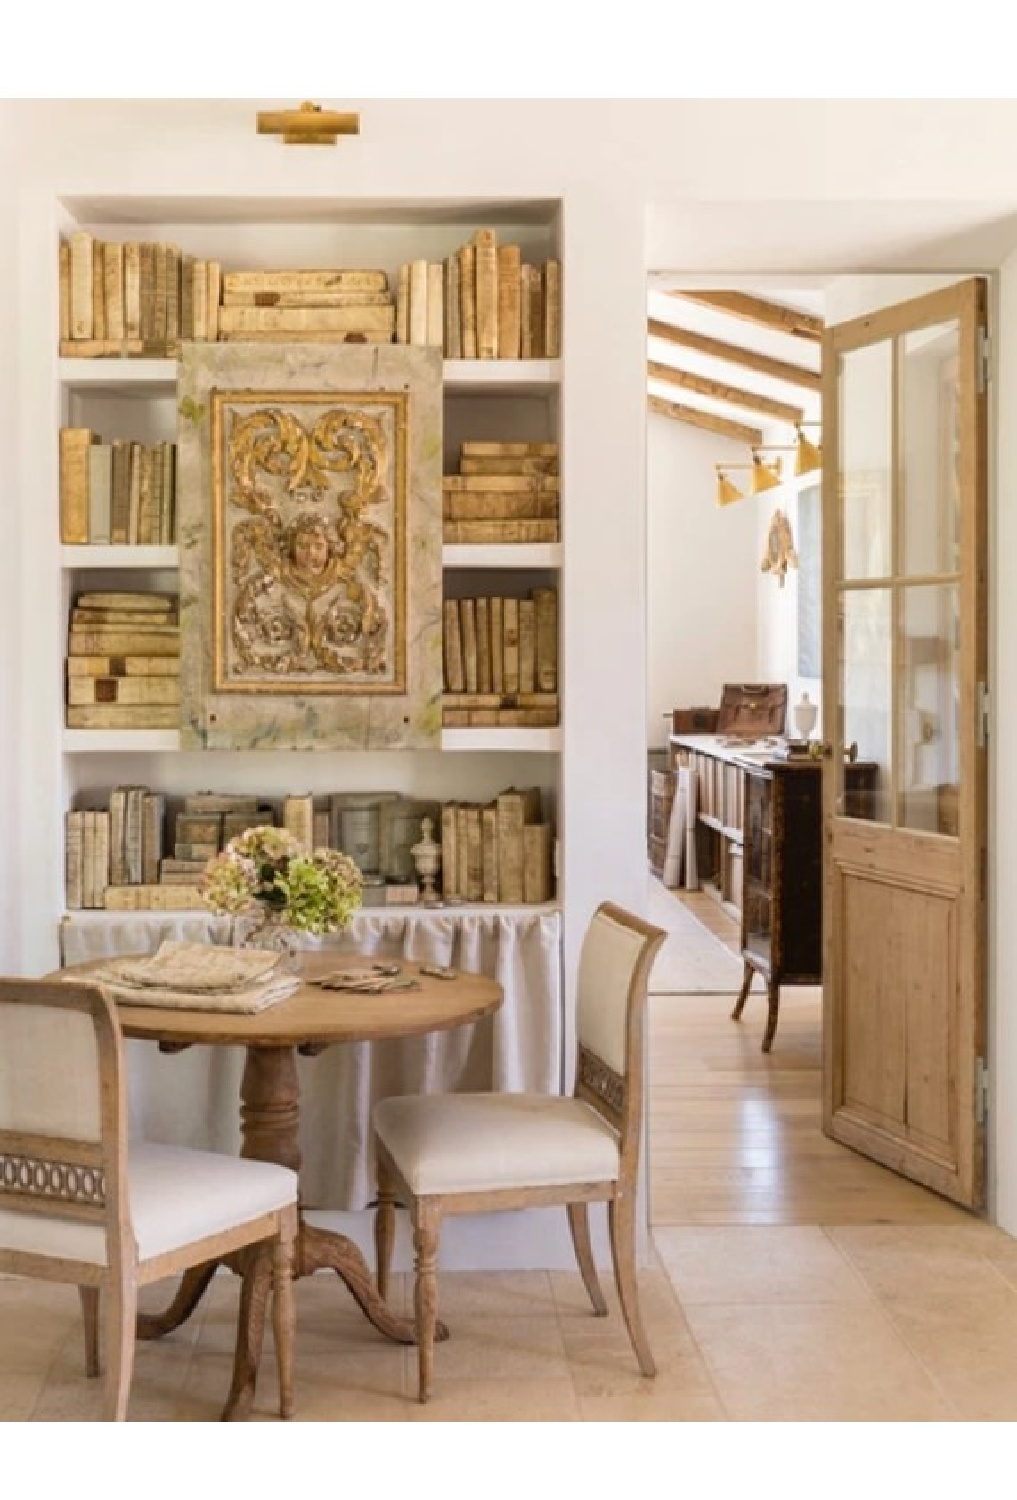 Patina Farm in Ojai, CA - architect: Steve Giannetti and design by Brooke Giannetti. Understated elegance and European country inspired. Photo: Montecito Properties.